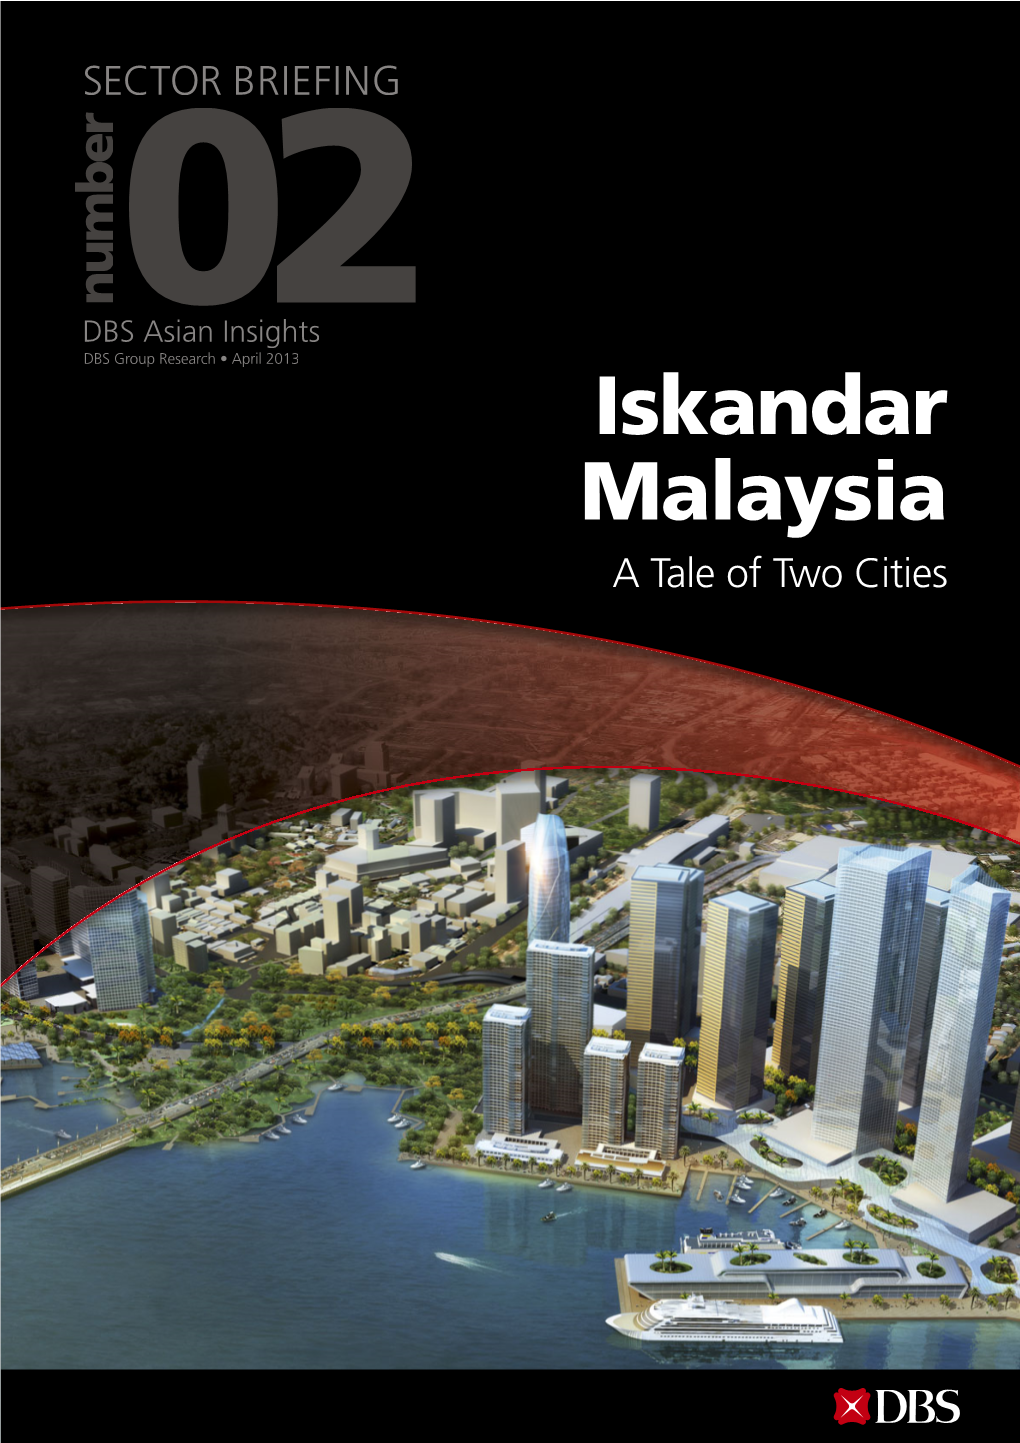 Iskandar Malaysia a Tale of Two Cities DBS Asian Insights SECTOR BRIEFING 02 02